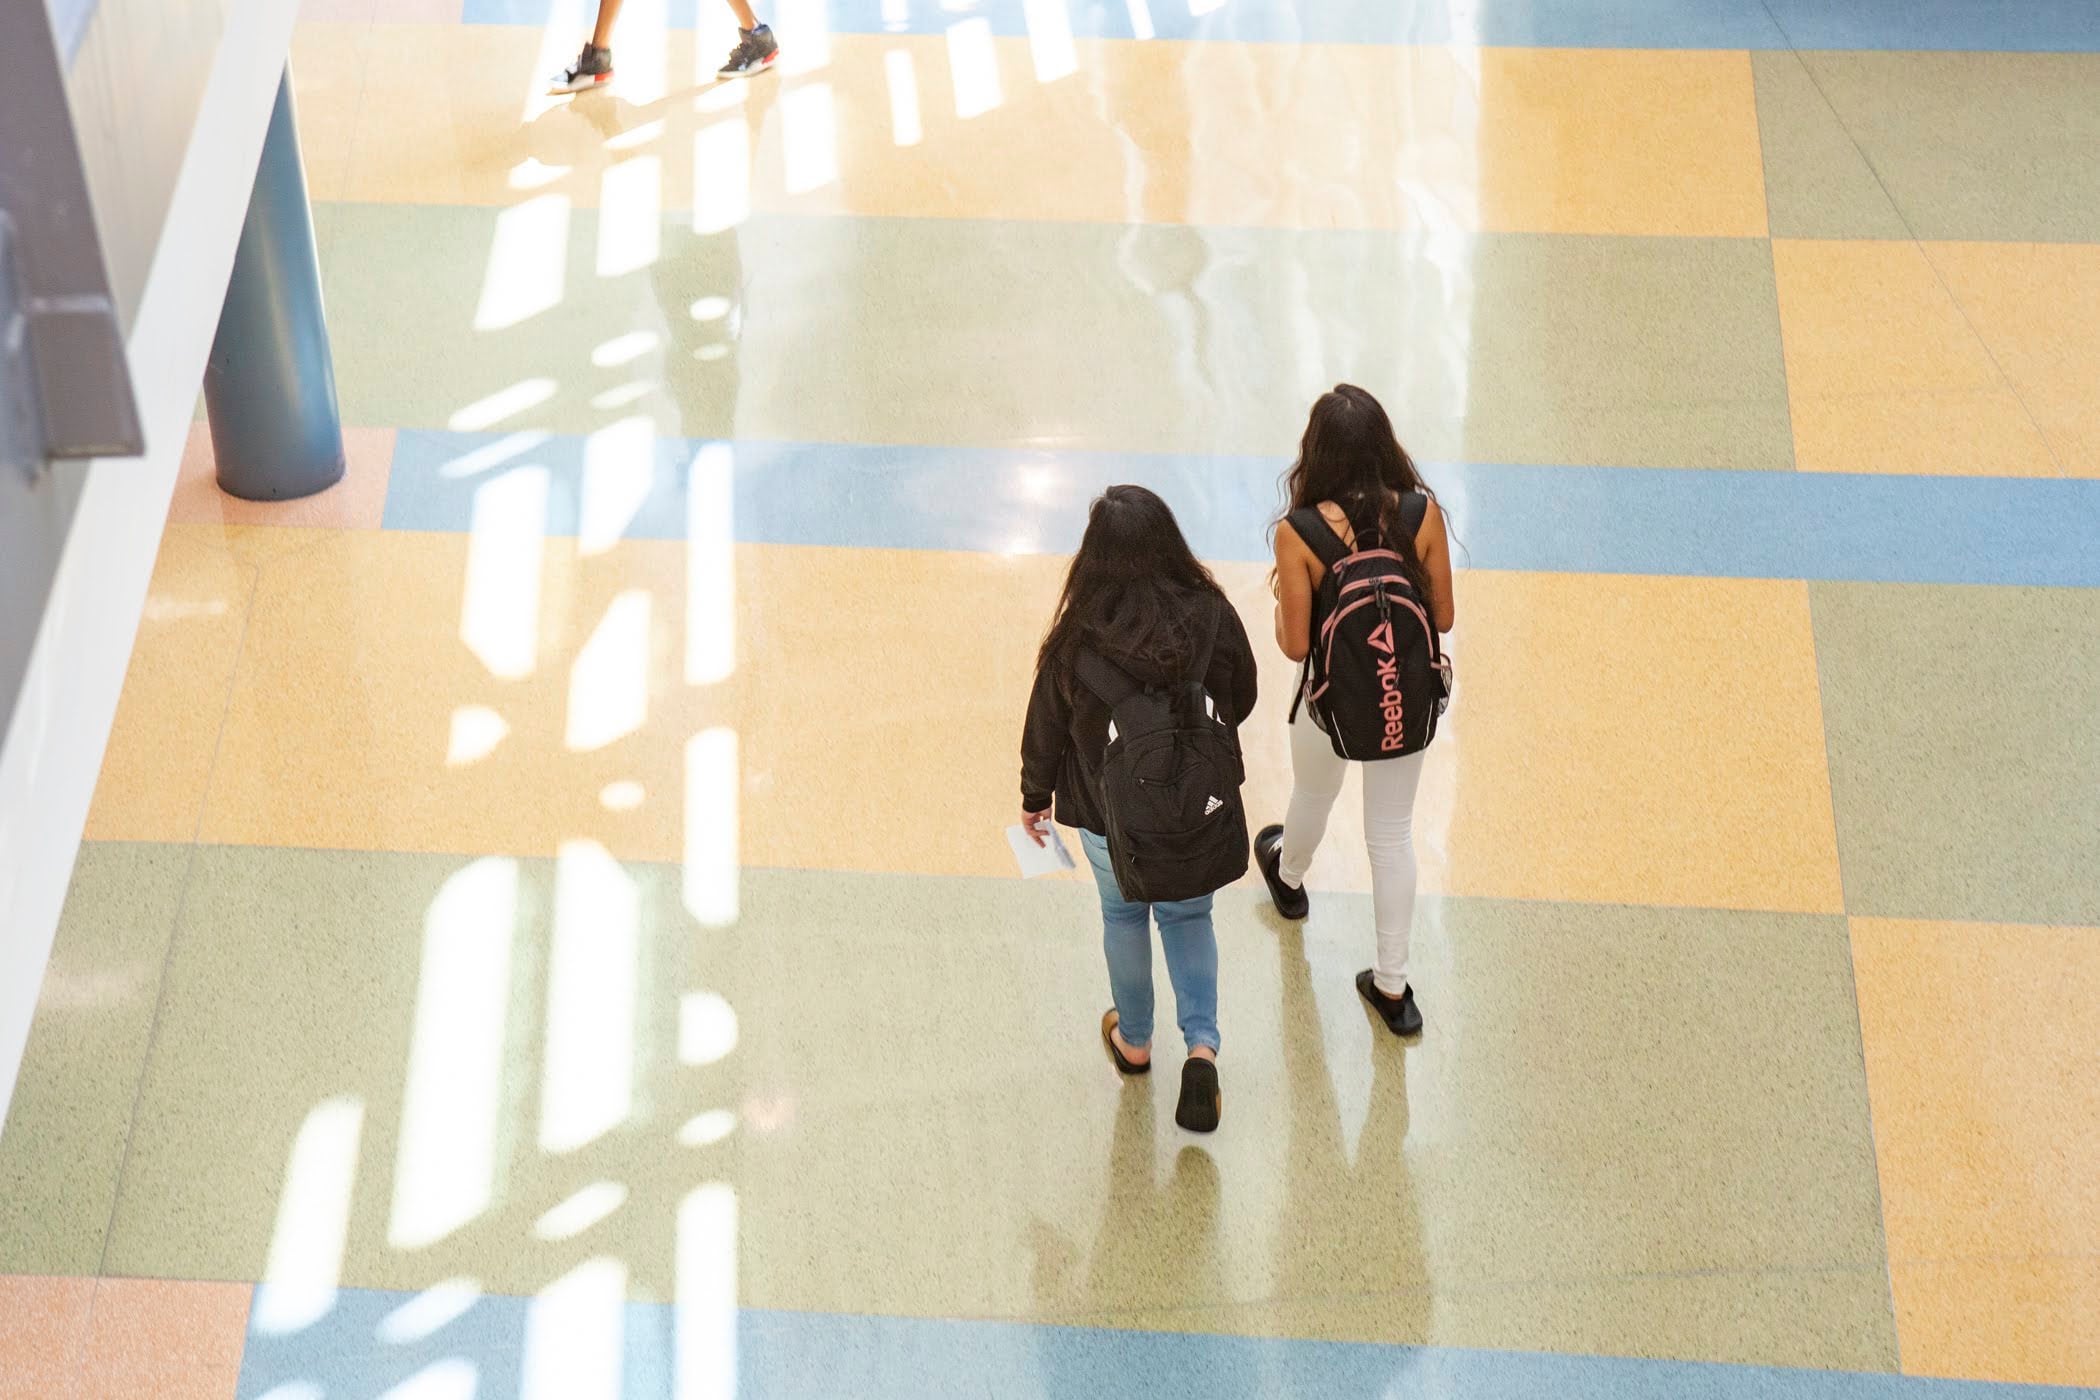 A bird's eye view of two students walking down a hallway.